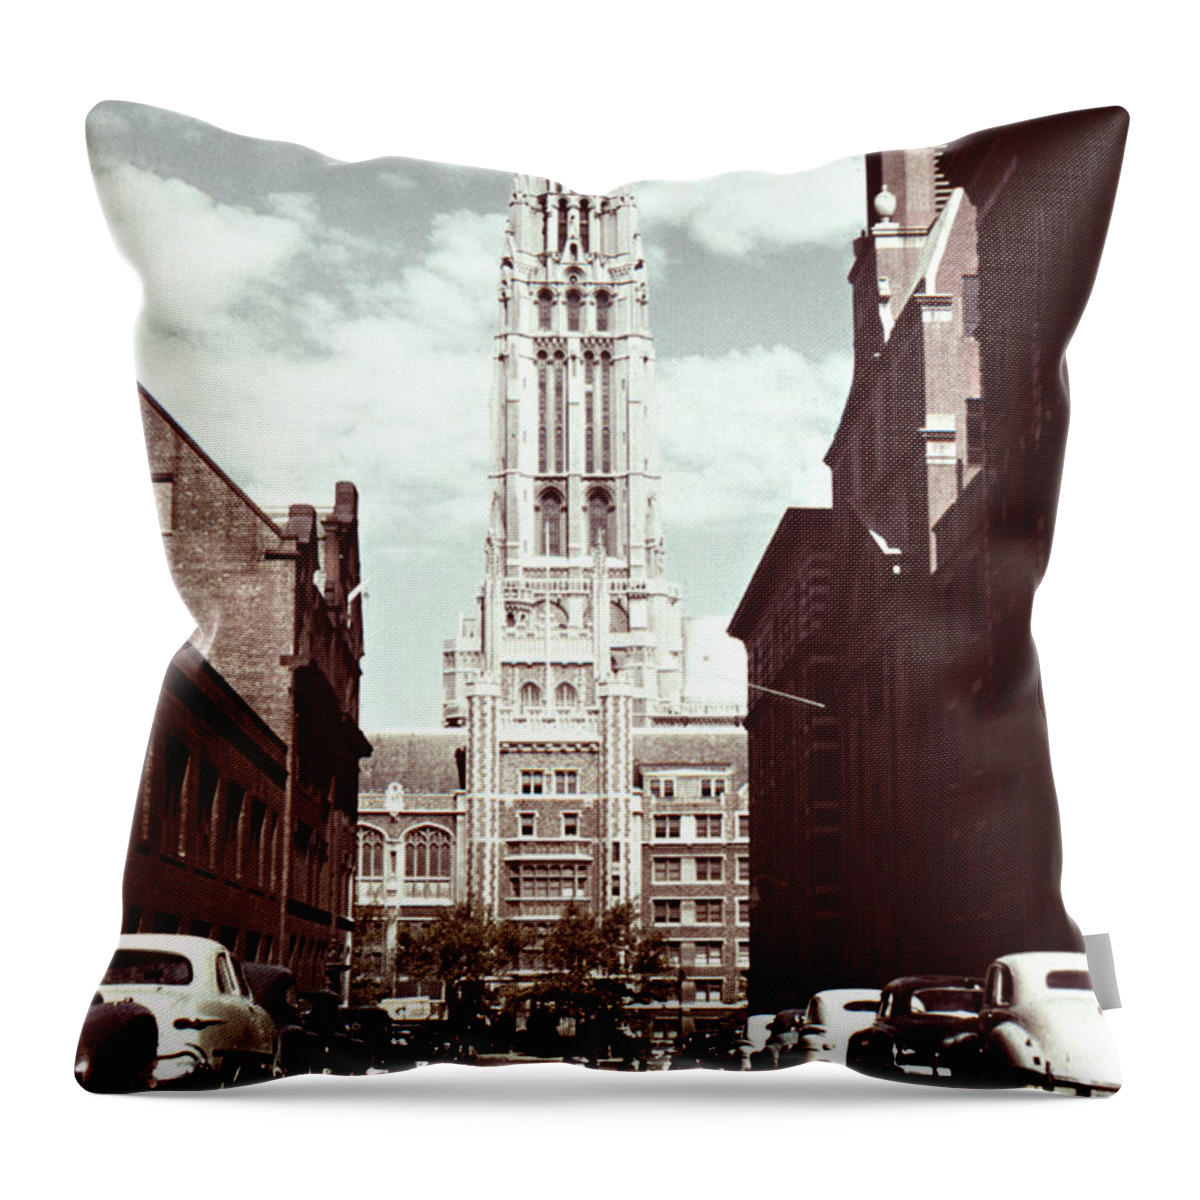 Historical Throw Pillow featuring the photograph 1950s Riverside Church New York by Marilyn Hunt